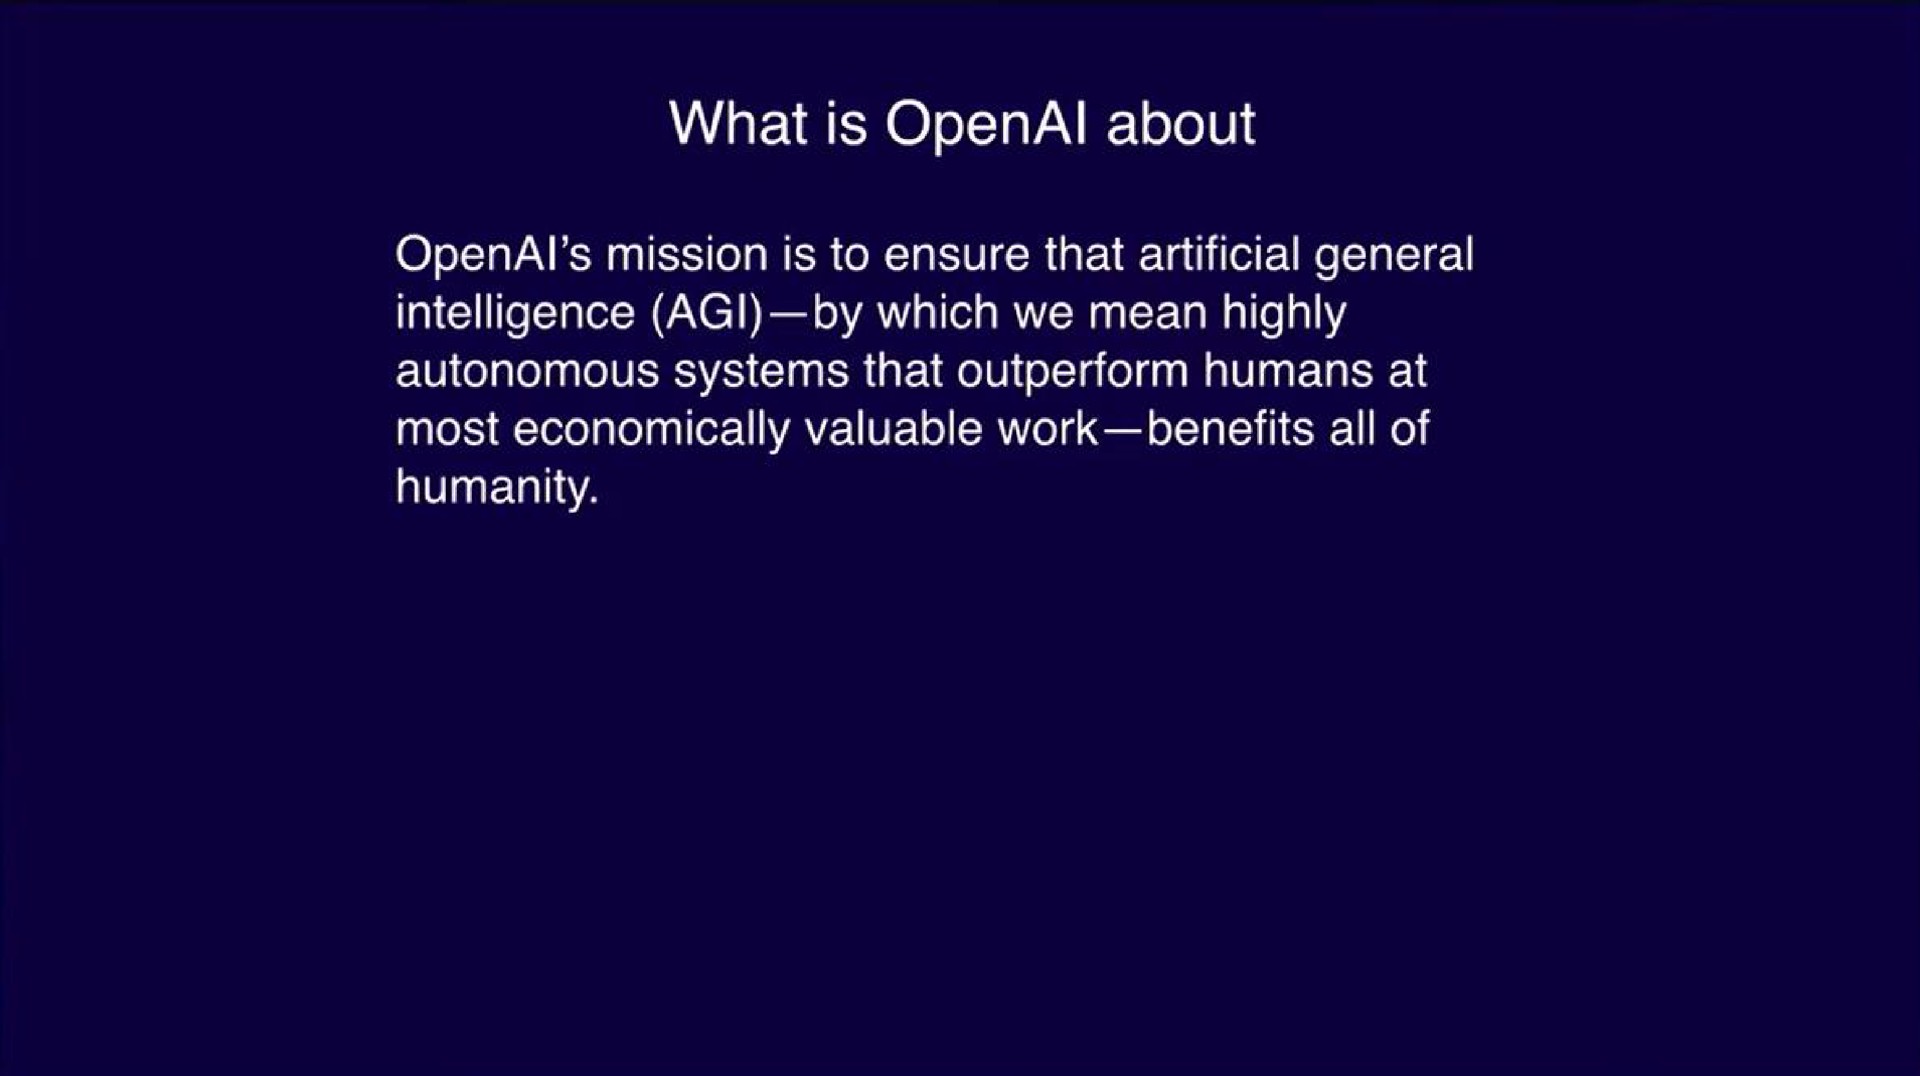 what is about mission is to ensure that artificial general intelligence by which we mean highly autonomous systems that outperform humans at most economically valuable work benefits all of humanity | OpenAI